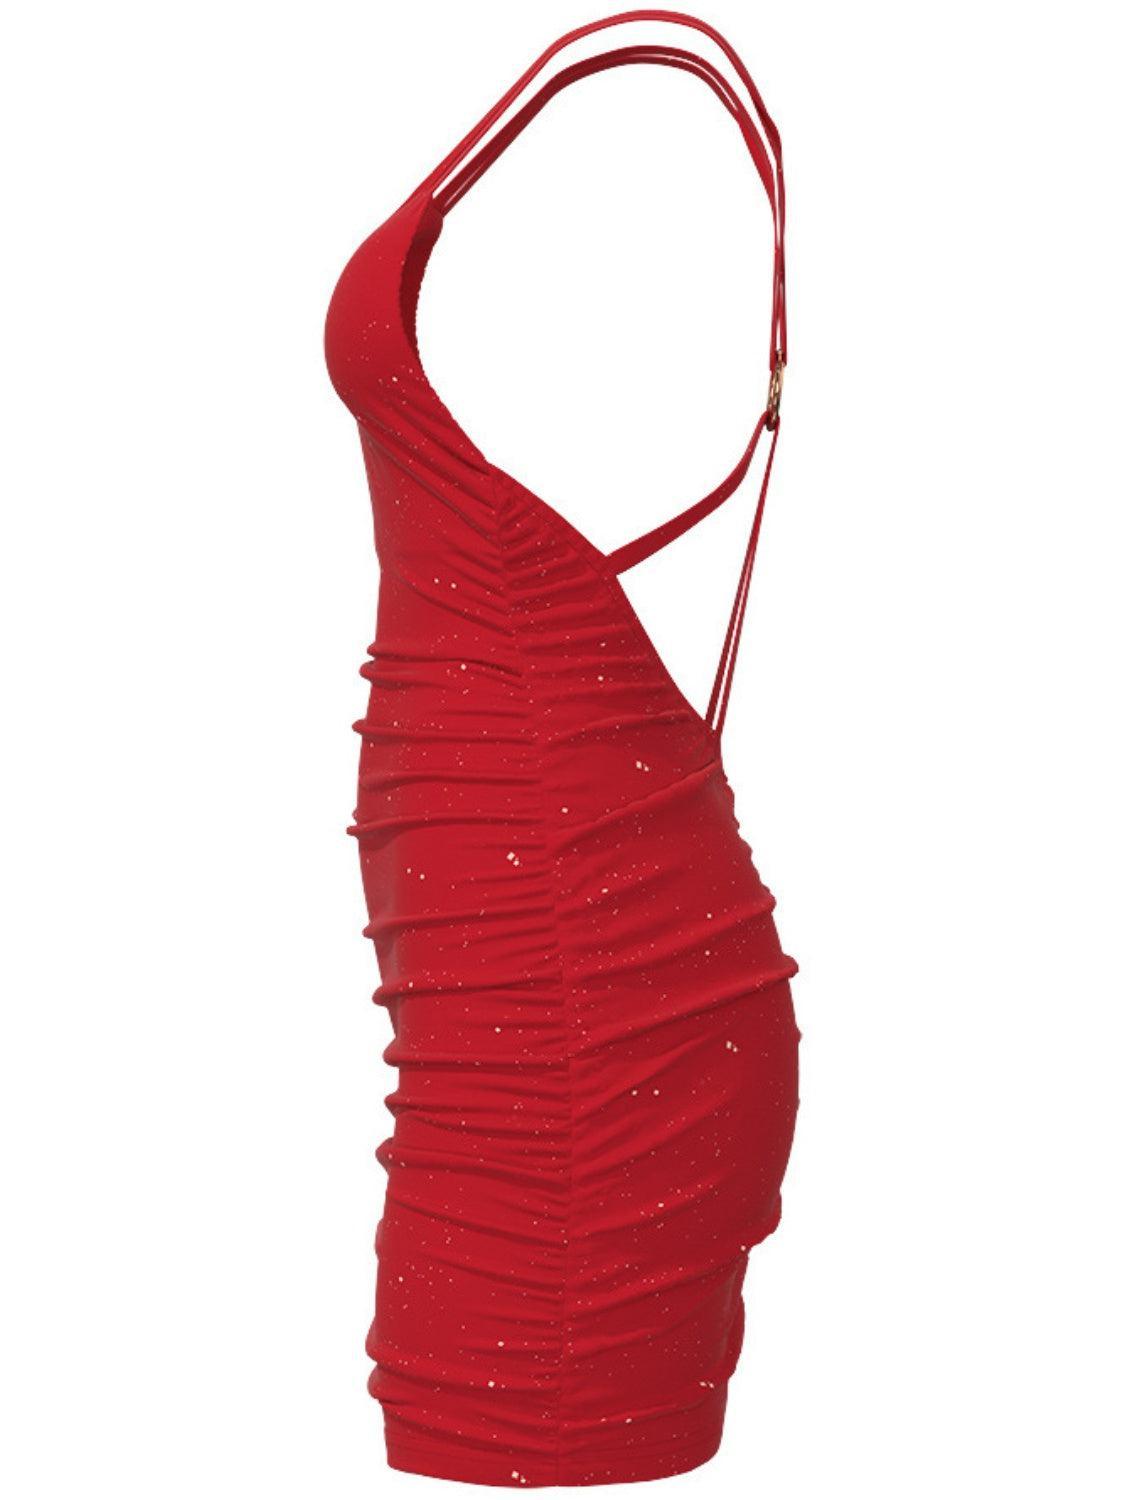 a women's red dress with ruffles on it